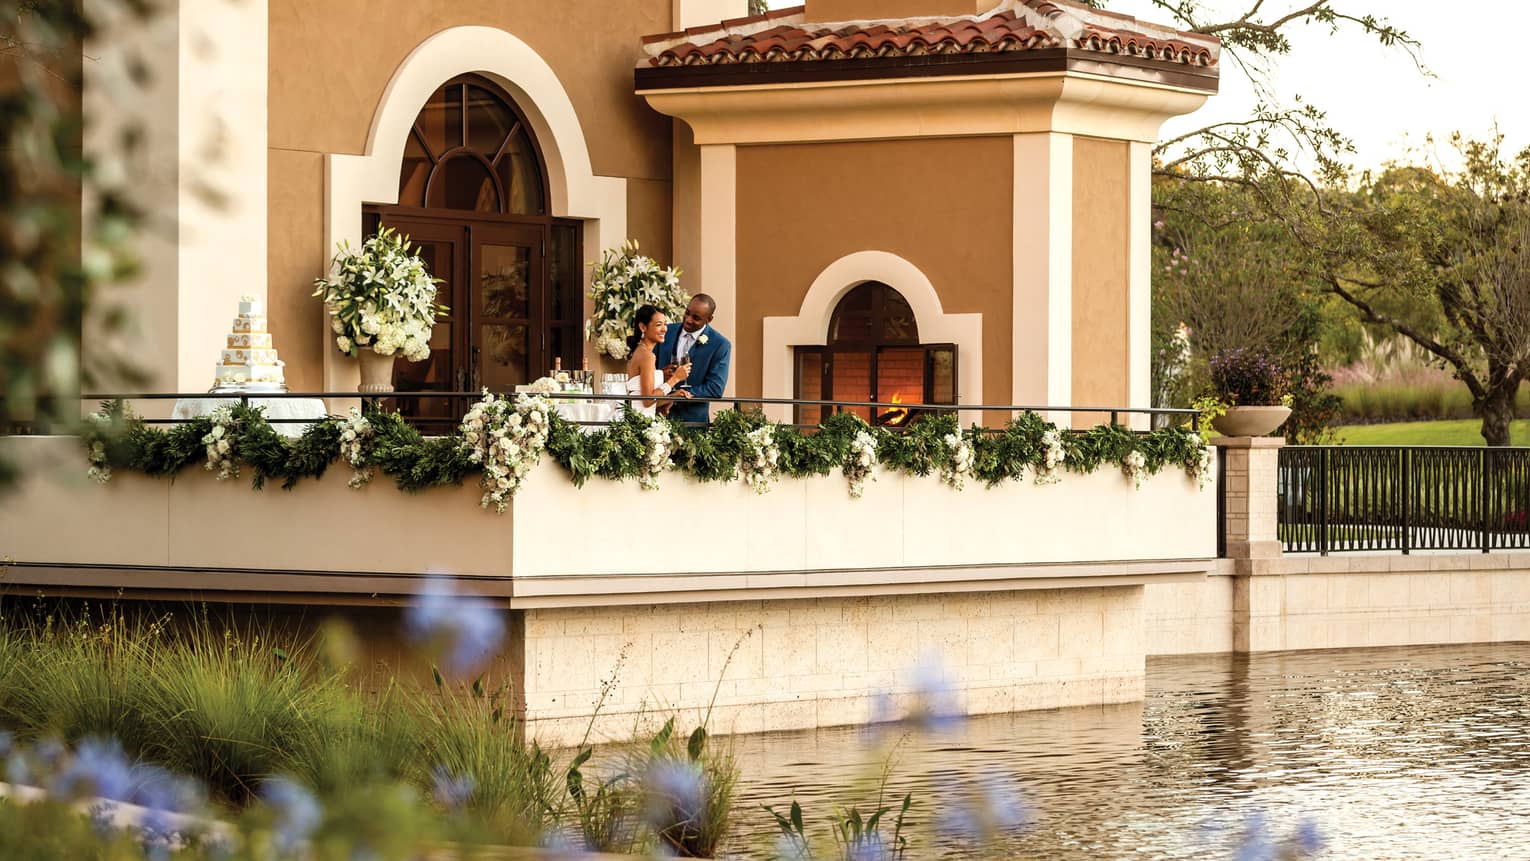 View across water to patio with bride and groom with Champagne, wedding cake, door to event space